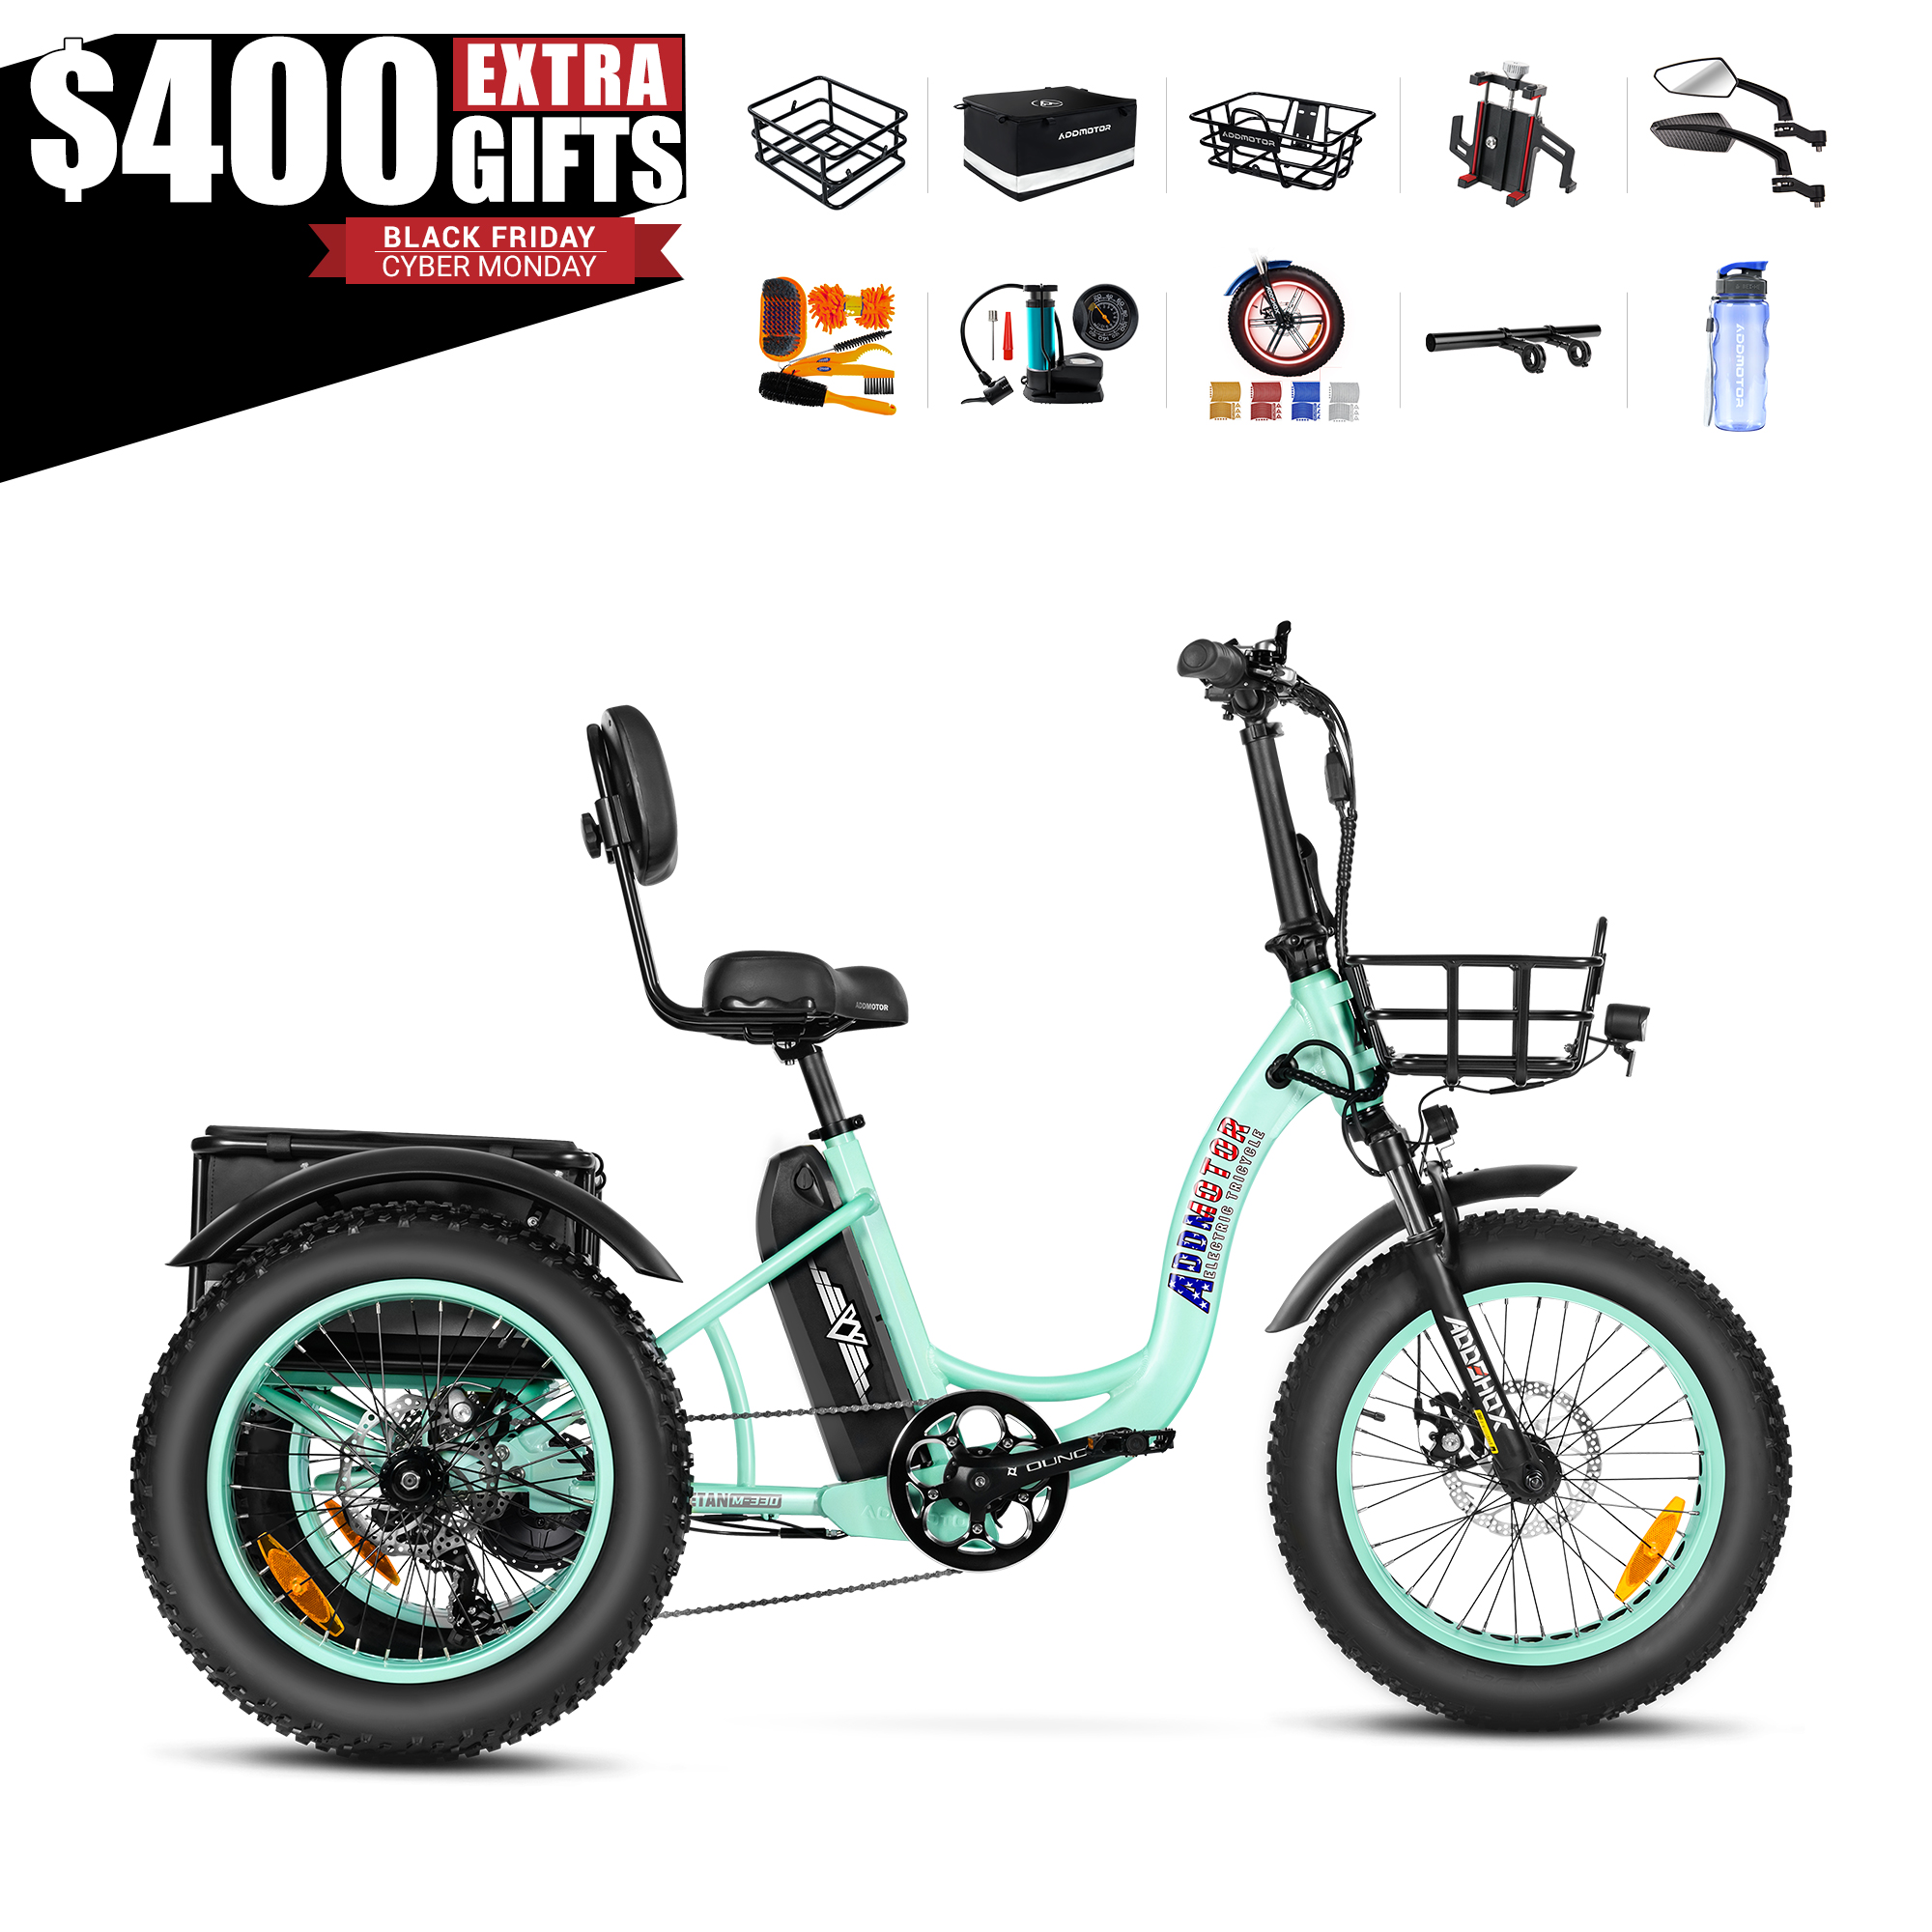 TRIKETAN M-330 with extra $100 OFF and $202 gifts